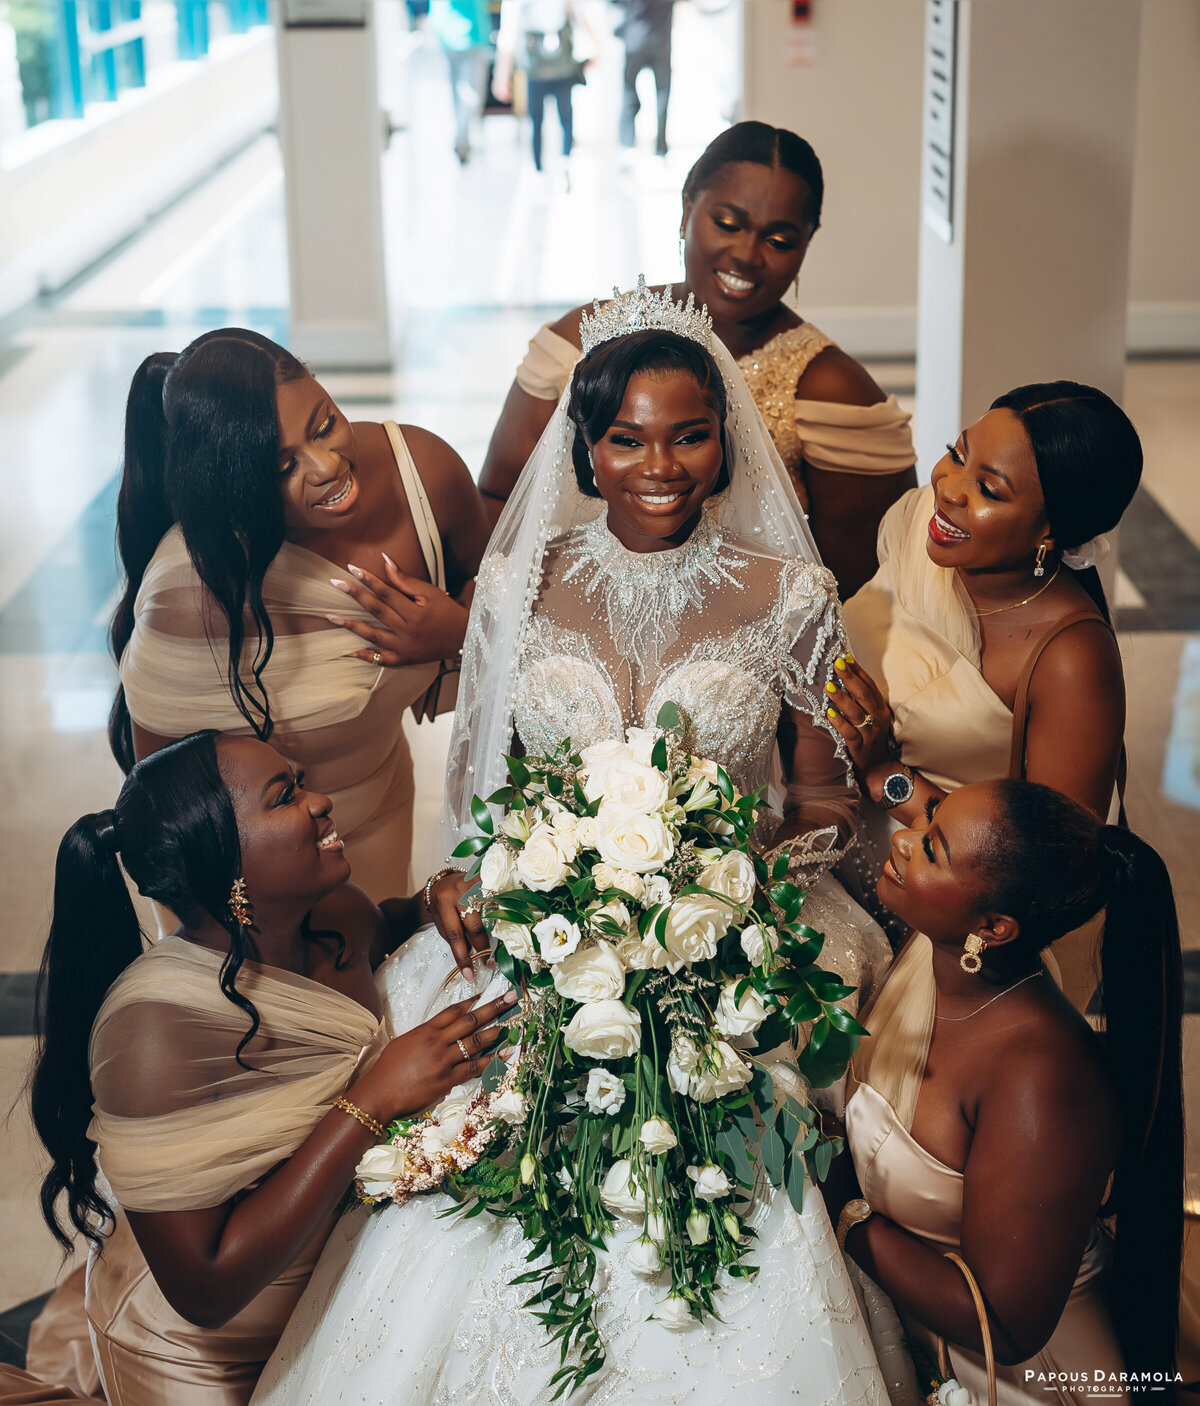 Abigail and Abije Oruka Events Papouse photographer Wedding event planners Toronto planner African Nigerian Eyitayo Dada Dara Ayoola outdoor ceremony floral princess ballgown rolls royce groom suit potraits  paradise banquet hall vaughn 127